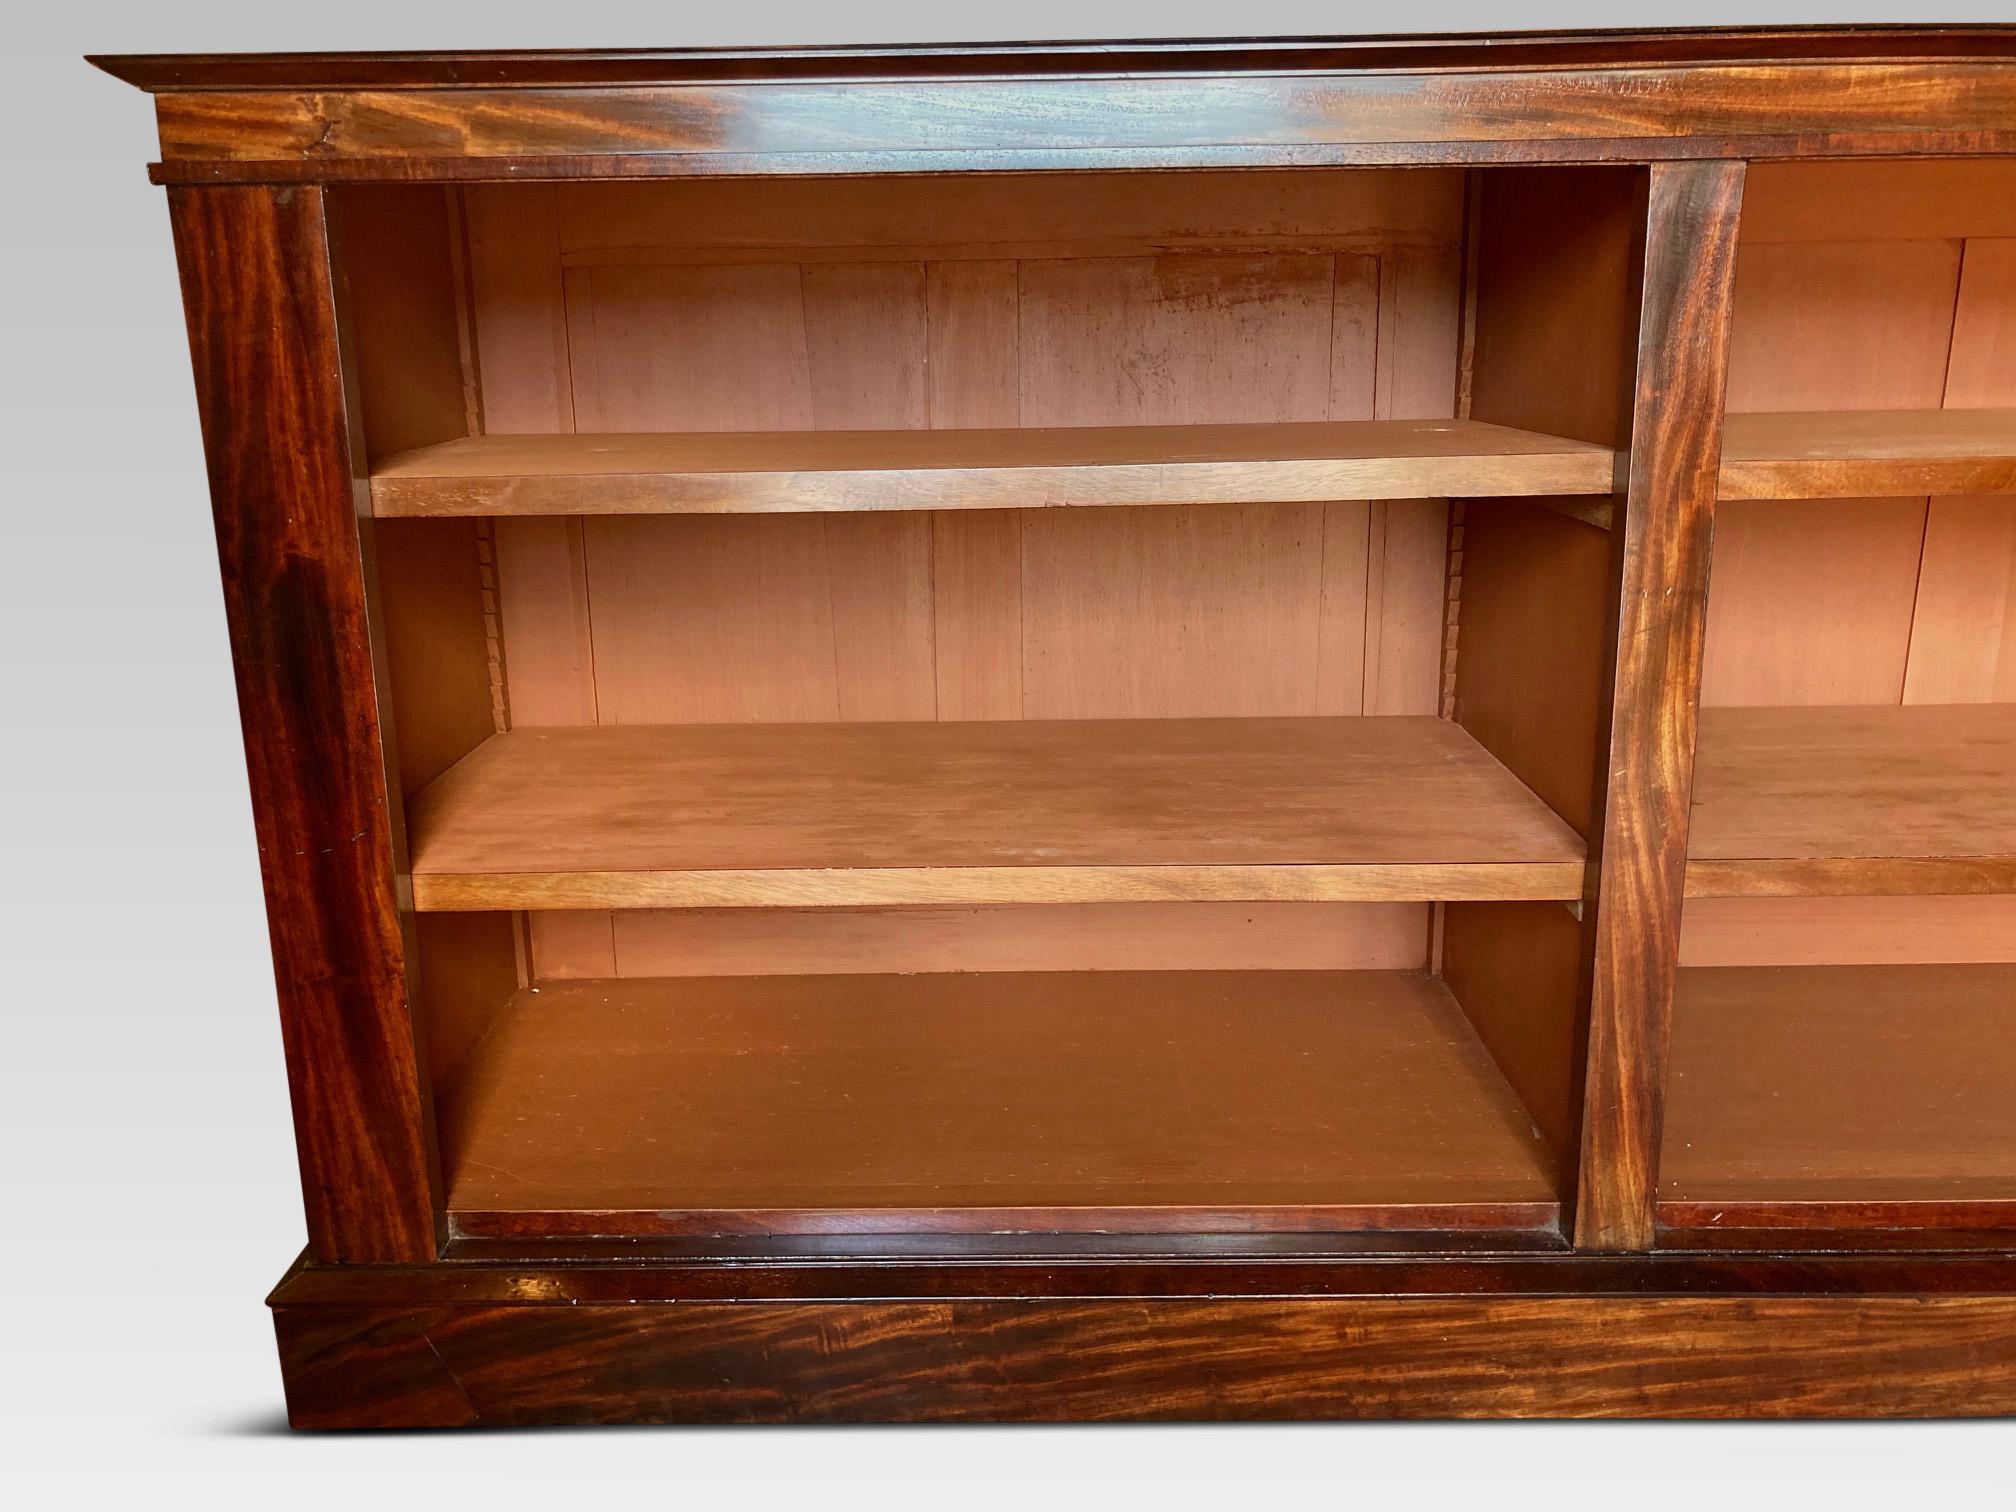 Attractive mid-19th century English library bookcase with 4 adjustable shelves.
This delightful antique bookcase stands on a plinth base. The bookcase is veneered
with well grained mahogany veneers and has a deep shelves. It
was most likely made